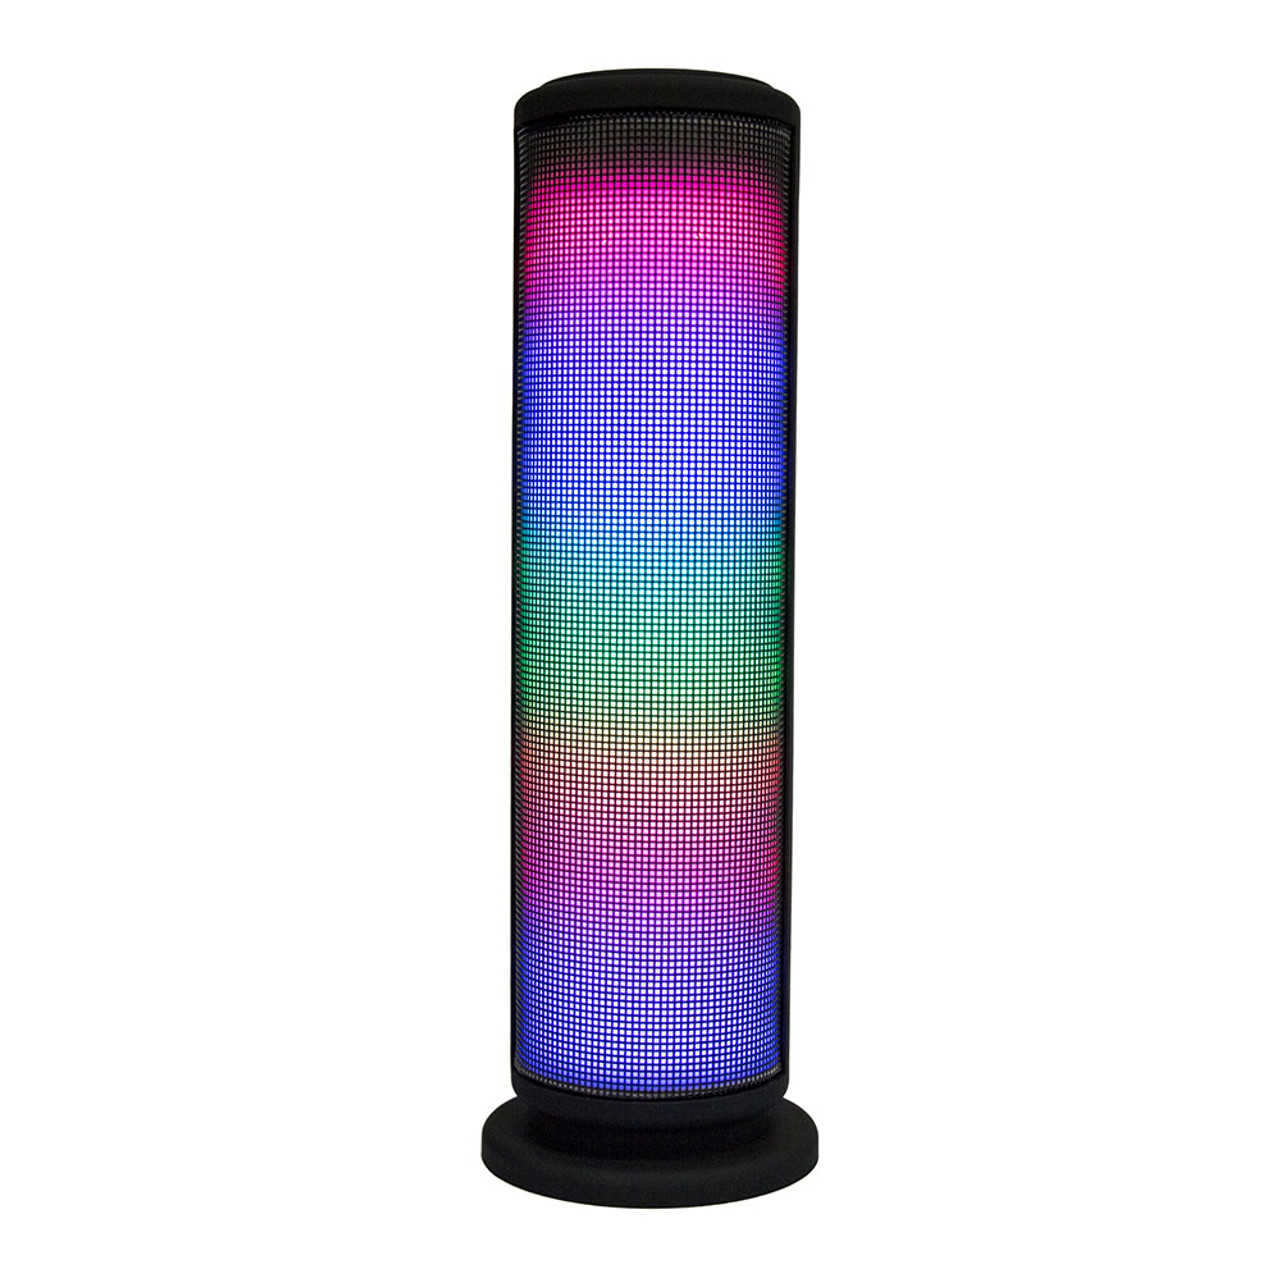 LED Bluetooth Wireless Tower Speaker product image